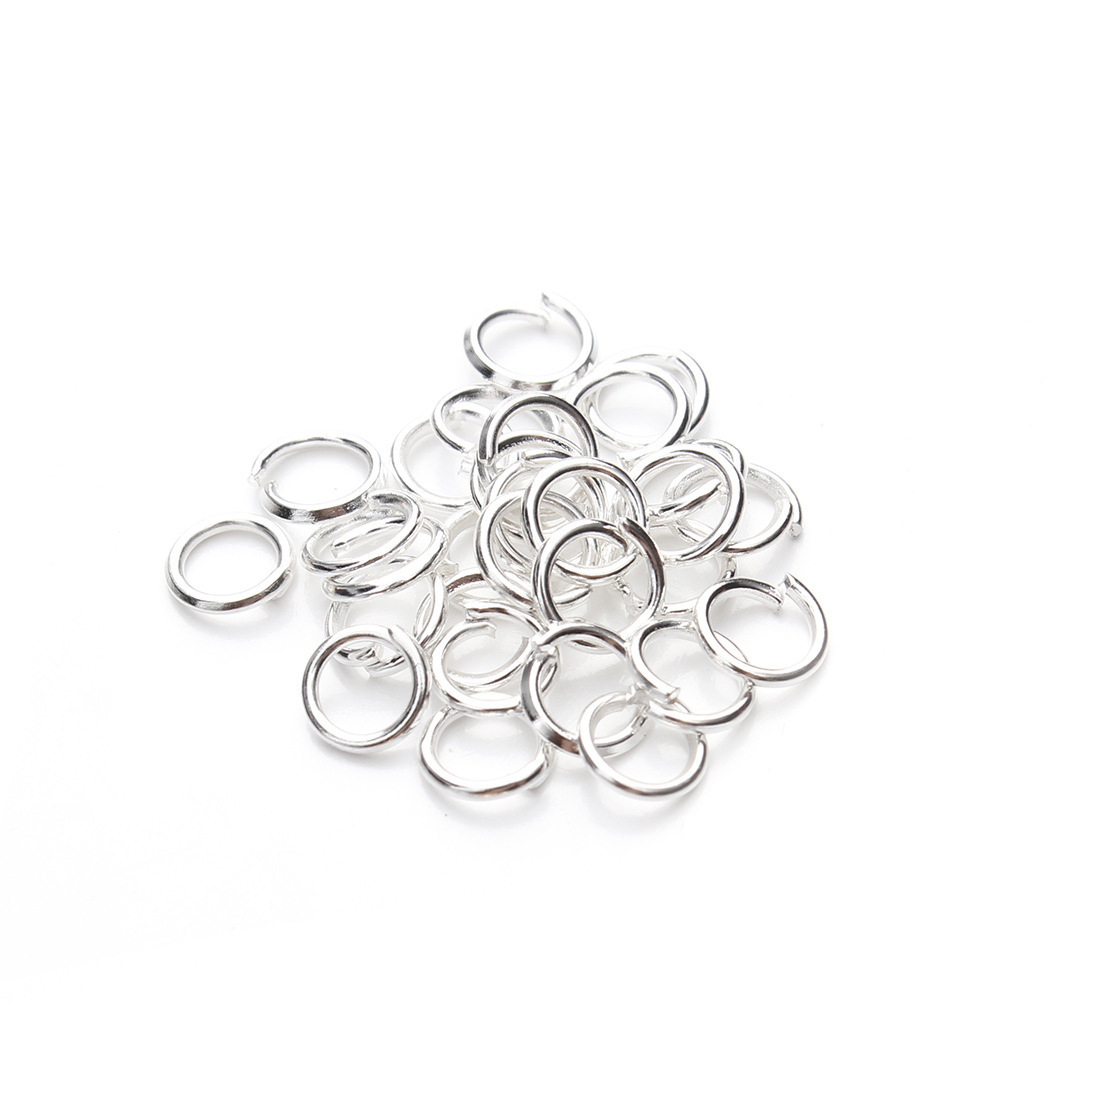 Silver outer diameter 10mm